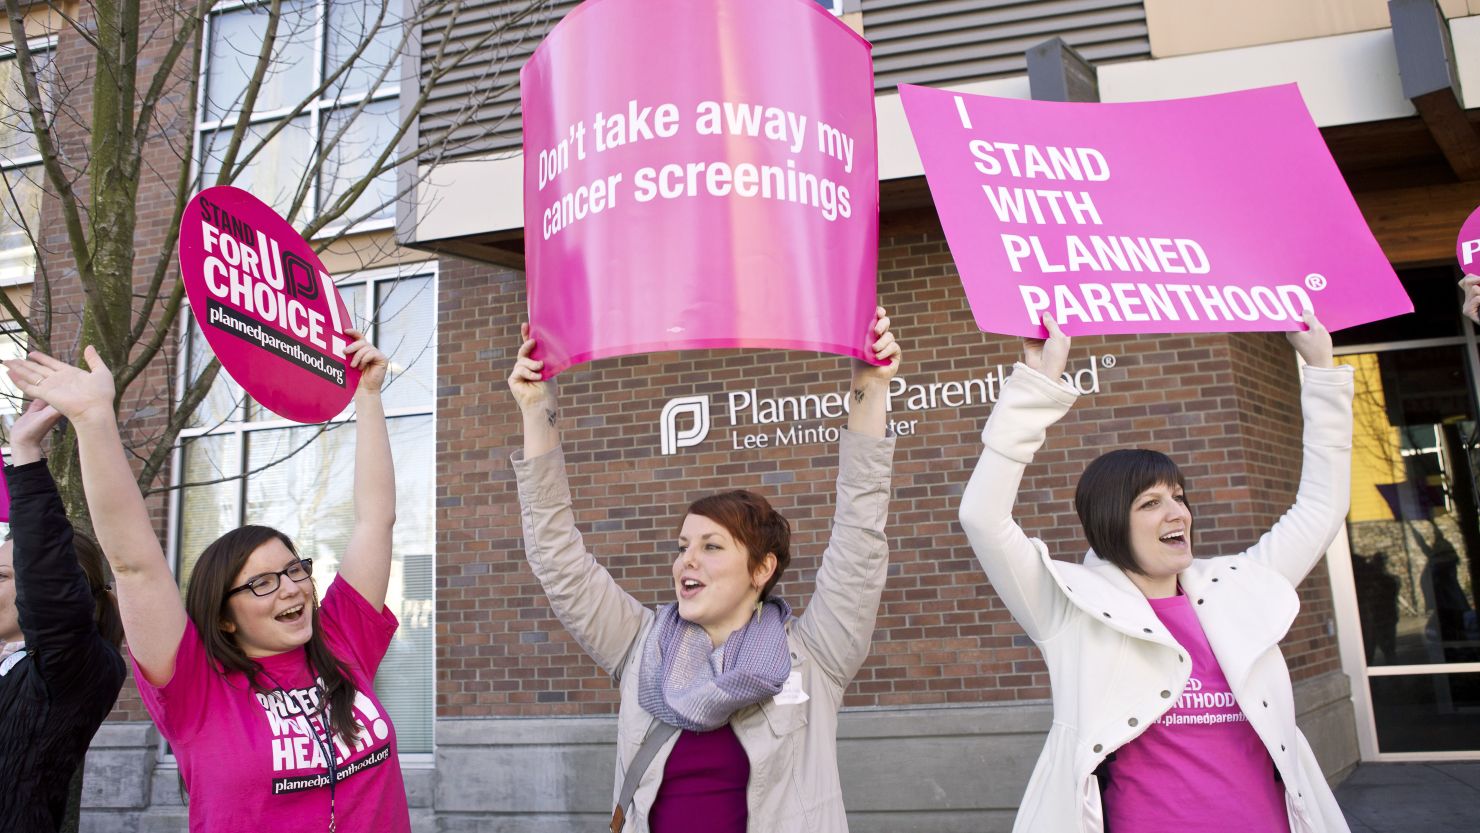 Protesters hold up signs following a press conference by U.S. Sen. Patty Murray outside at a Planned Parenthood Clinic Feb. 3